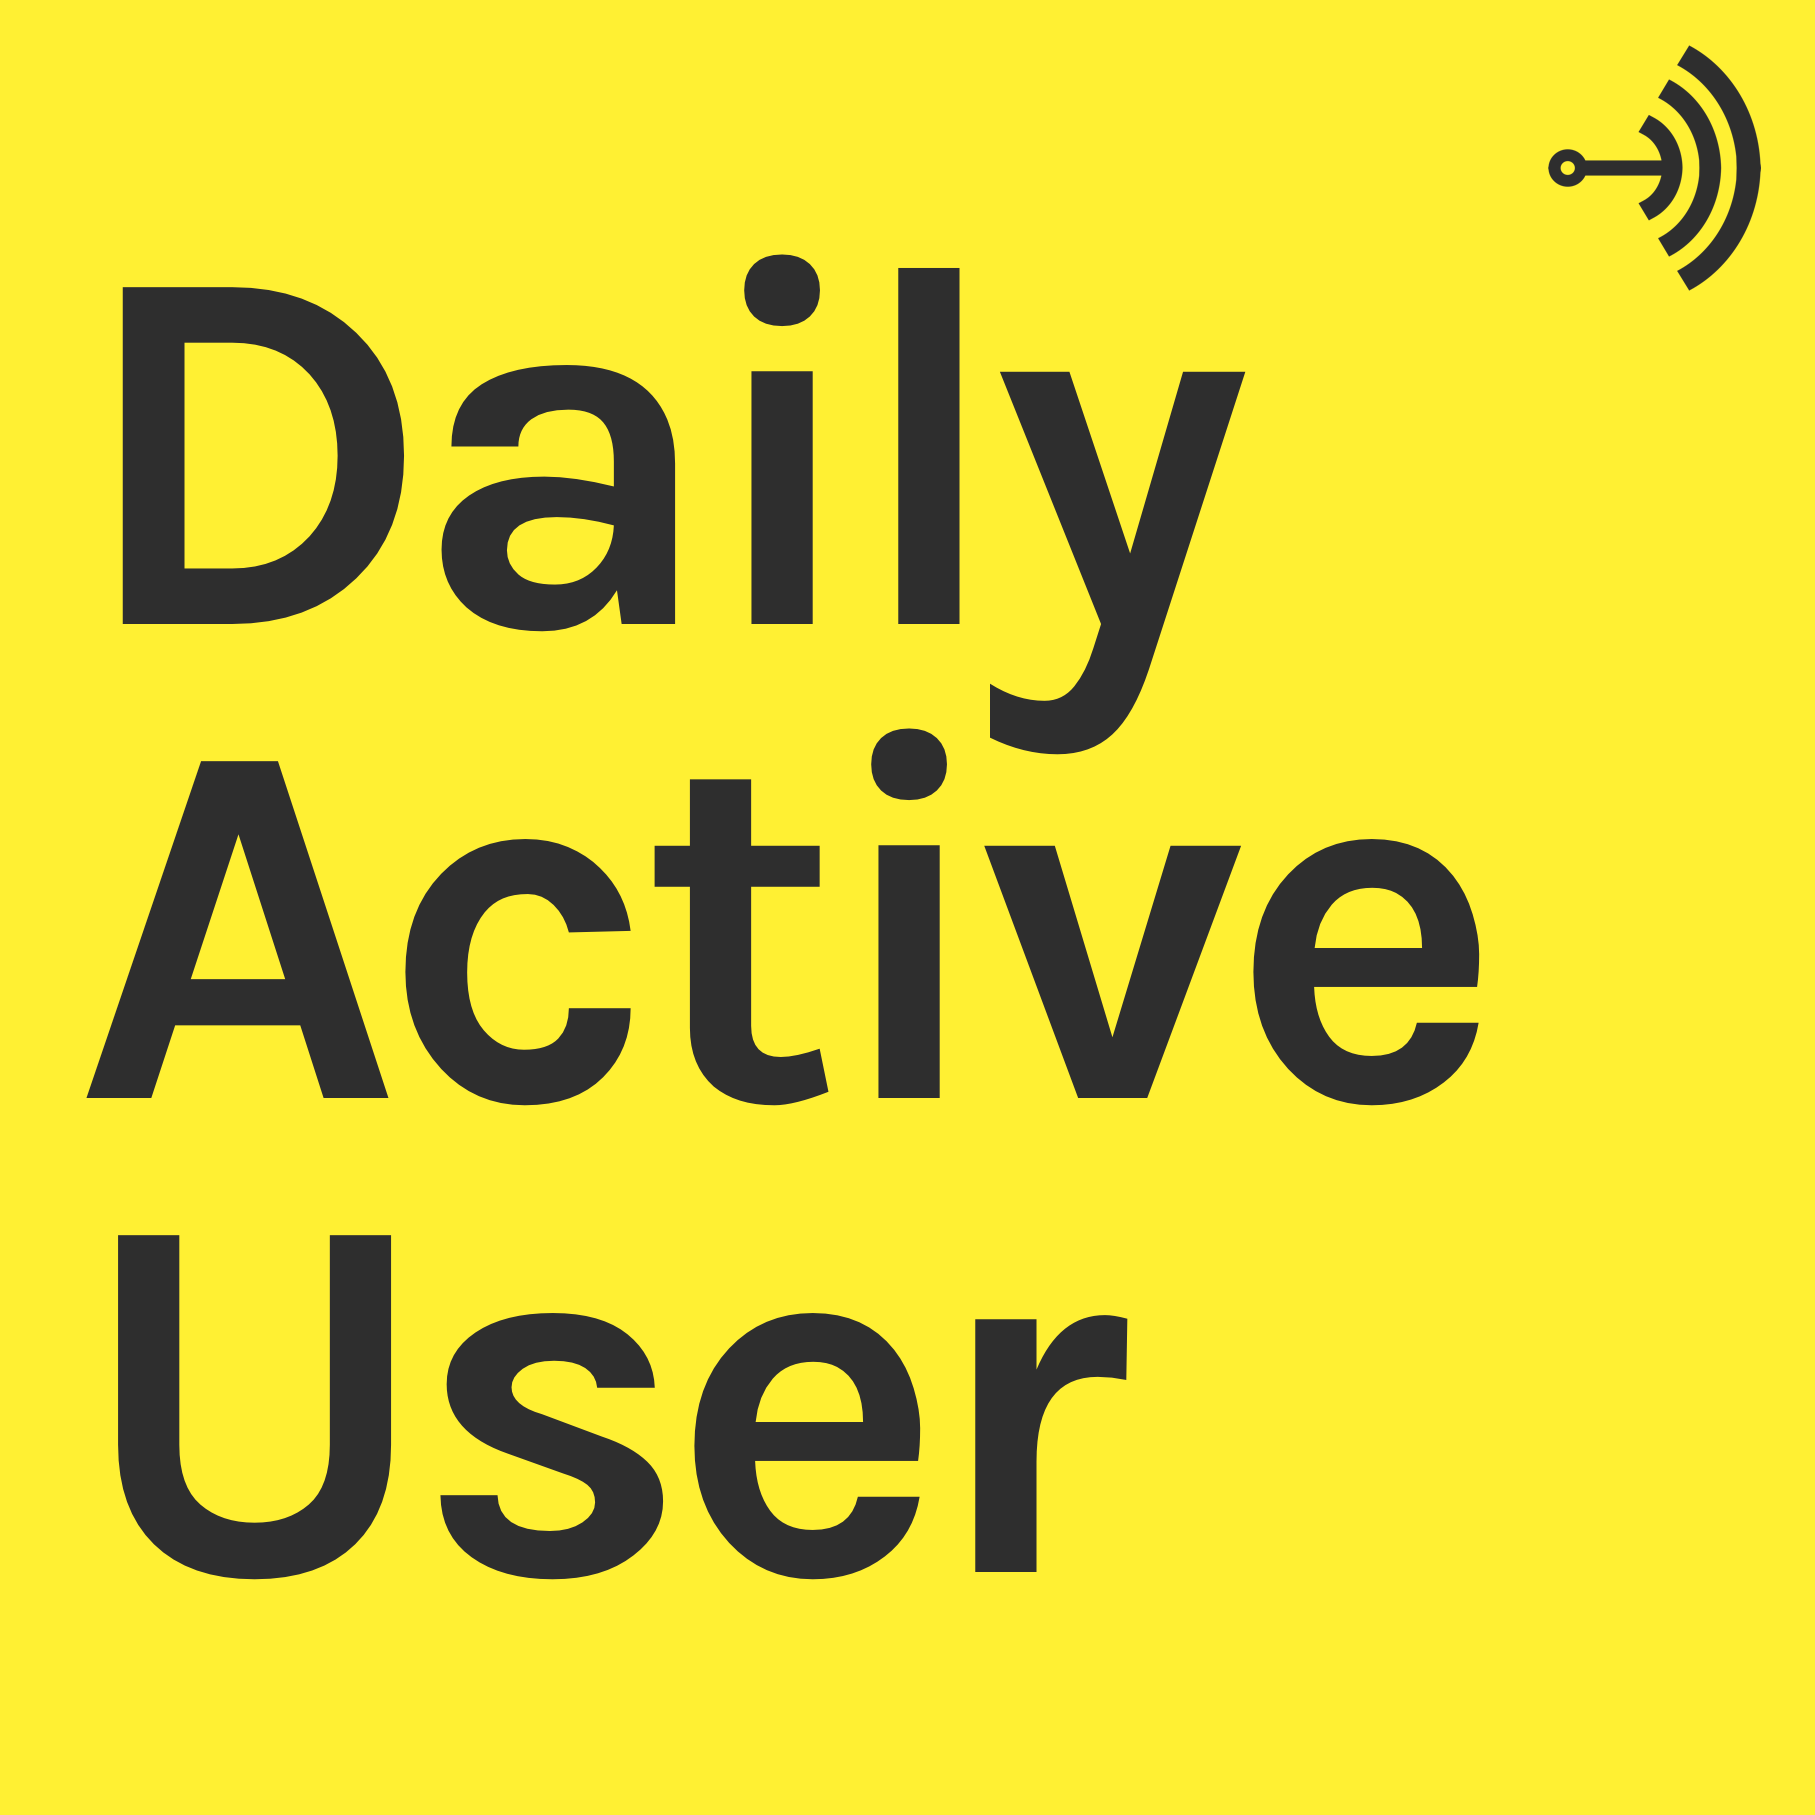 jqbx daily active users